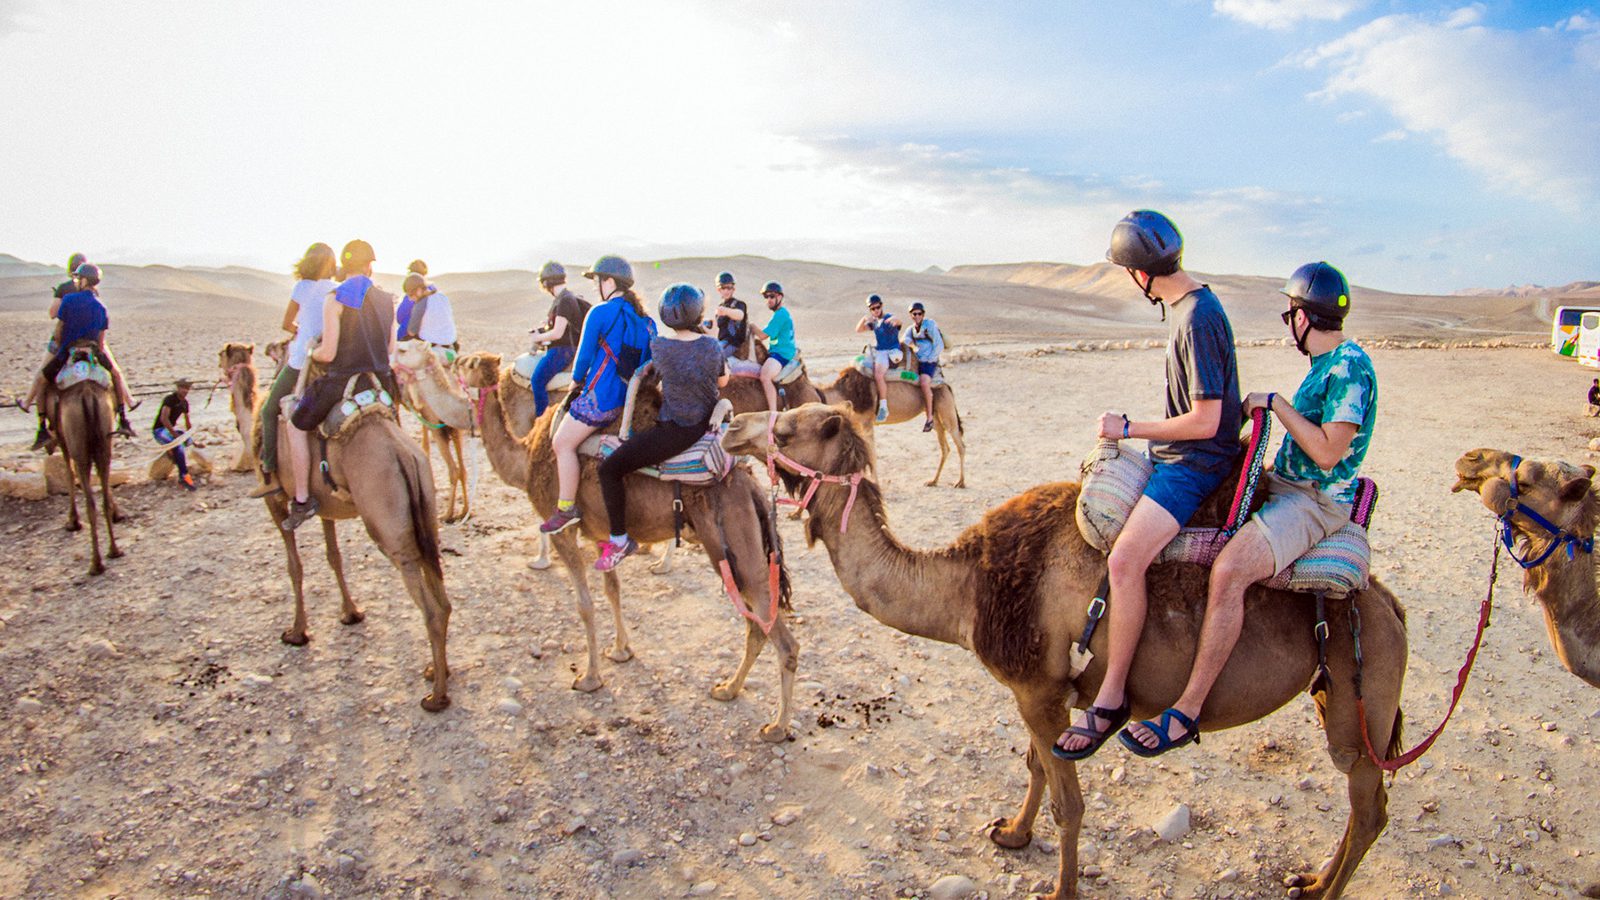 Birthright Israel participants ride camels during a trip in 2016. Photo by HRYMX/Flickr/Creative Commons